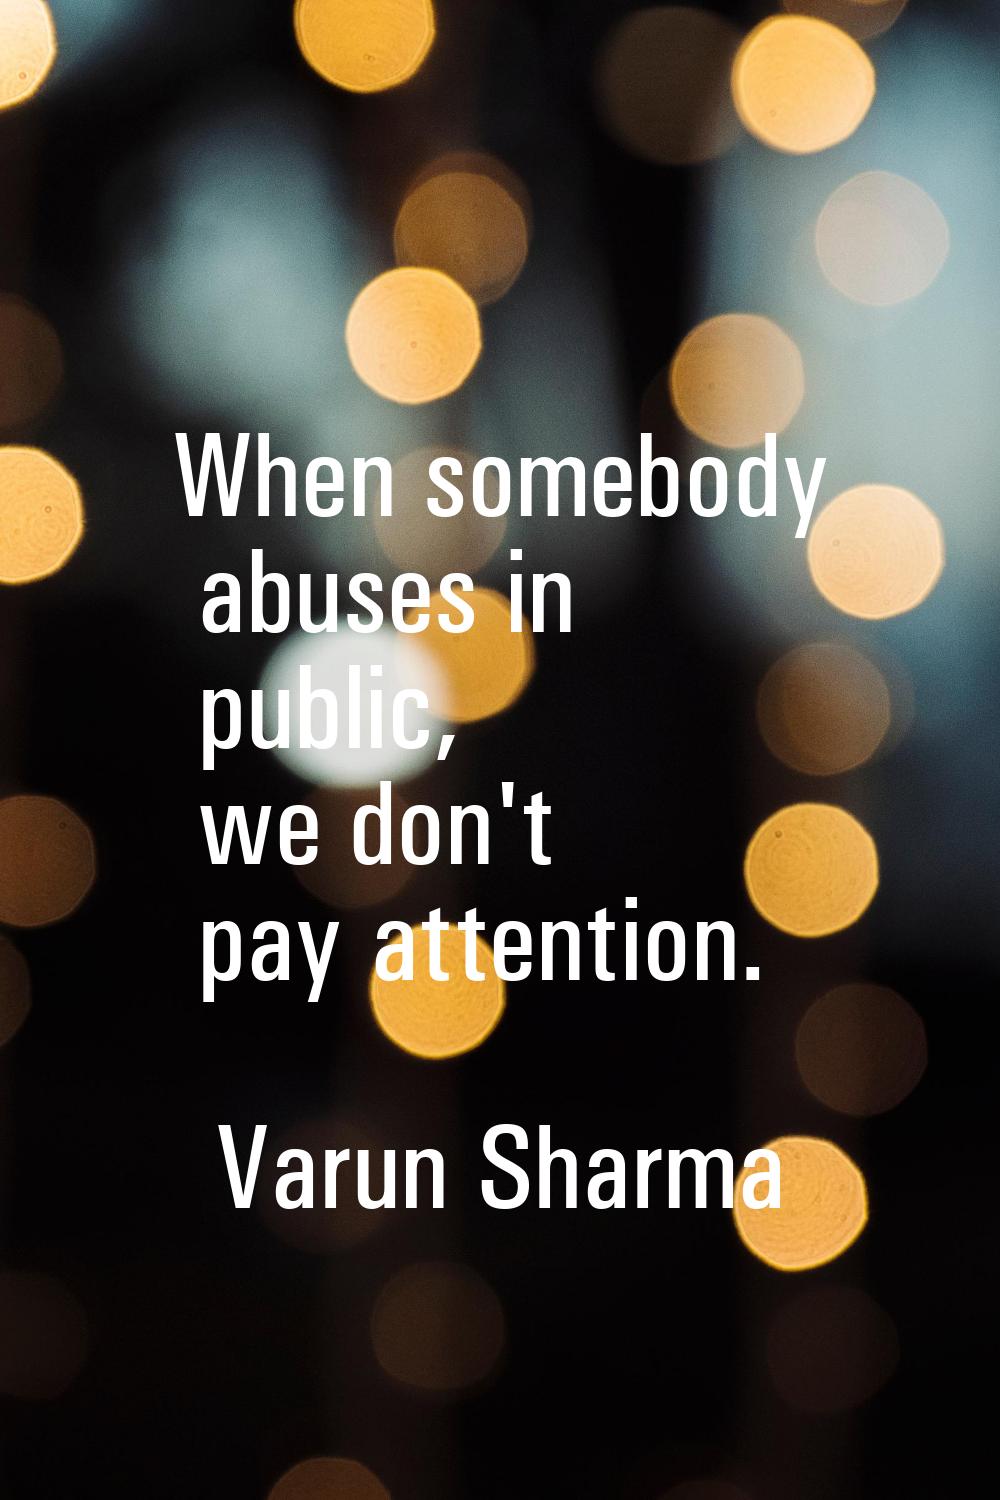 When somebody abuses in public, we don't pay attention.